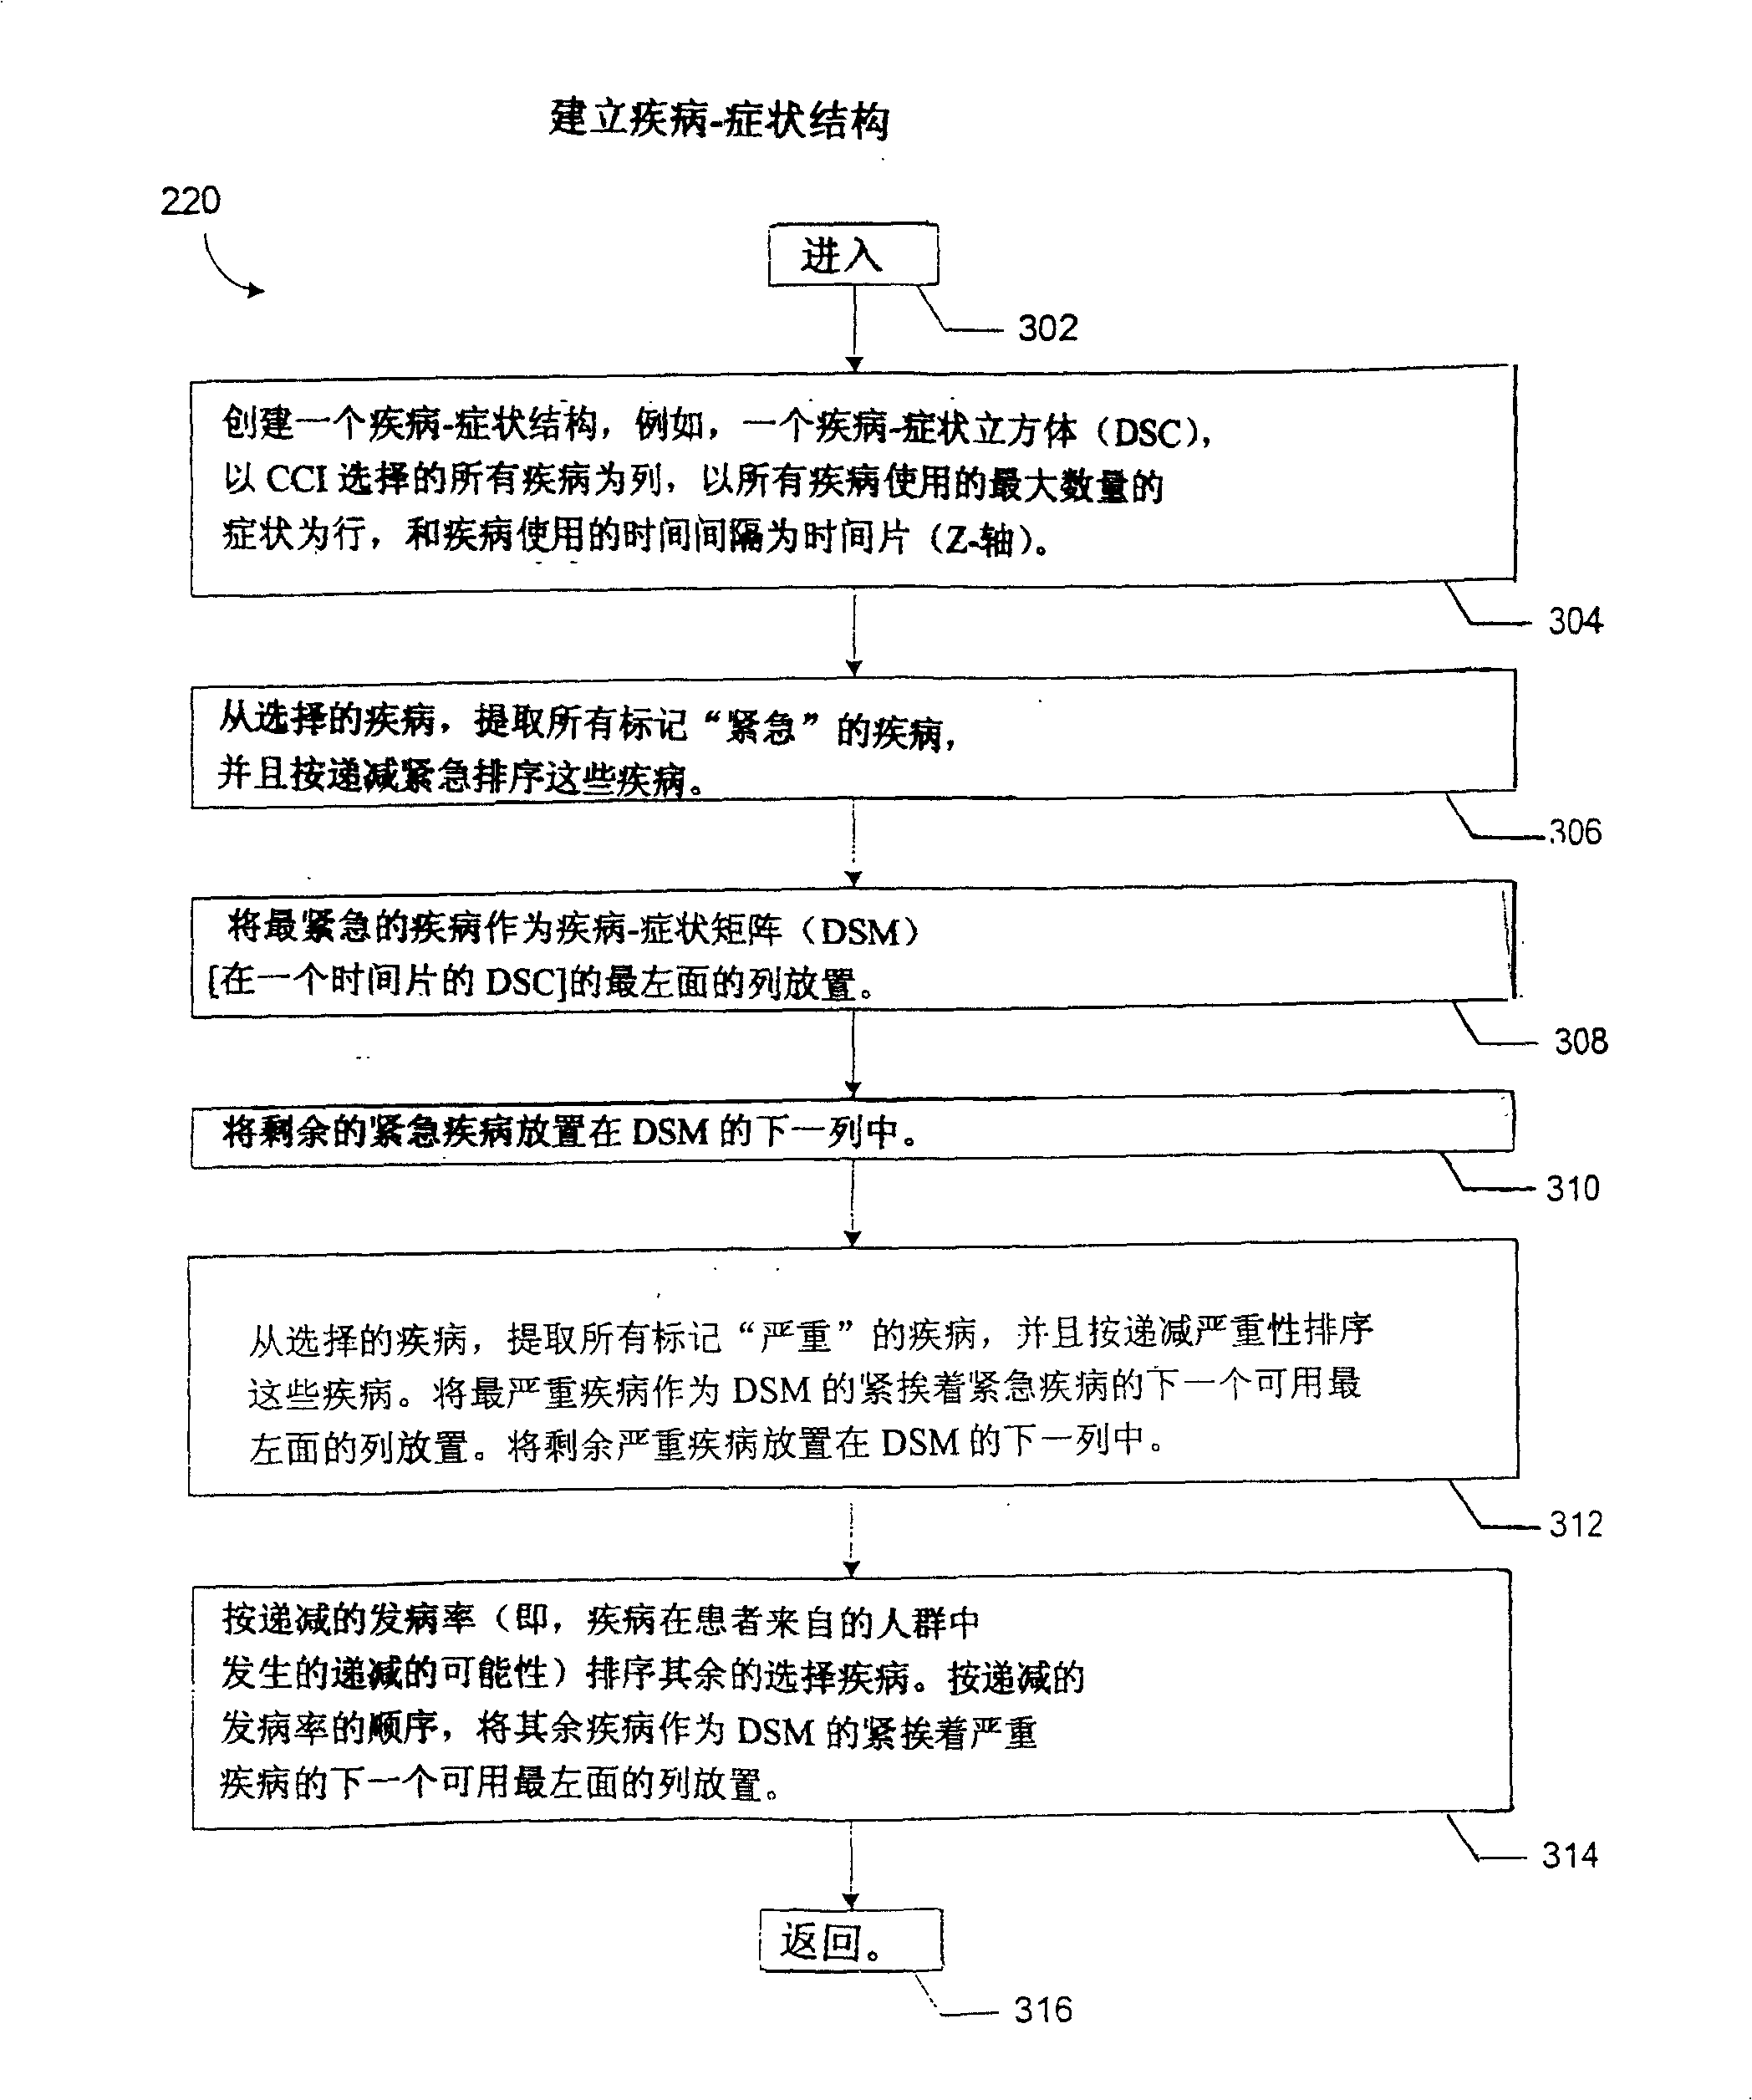 Automated diagnostic system and method